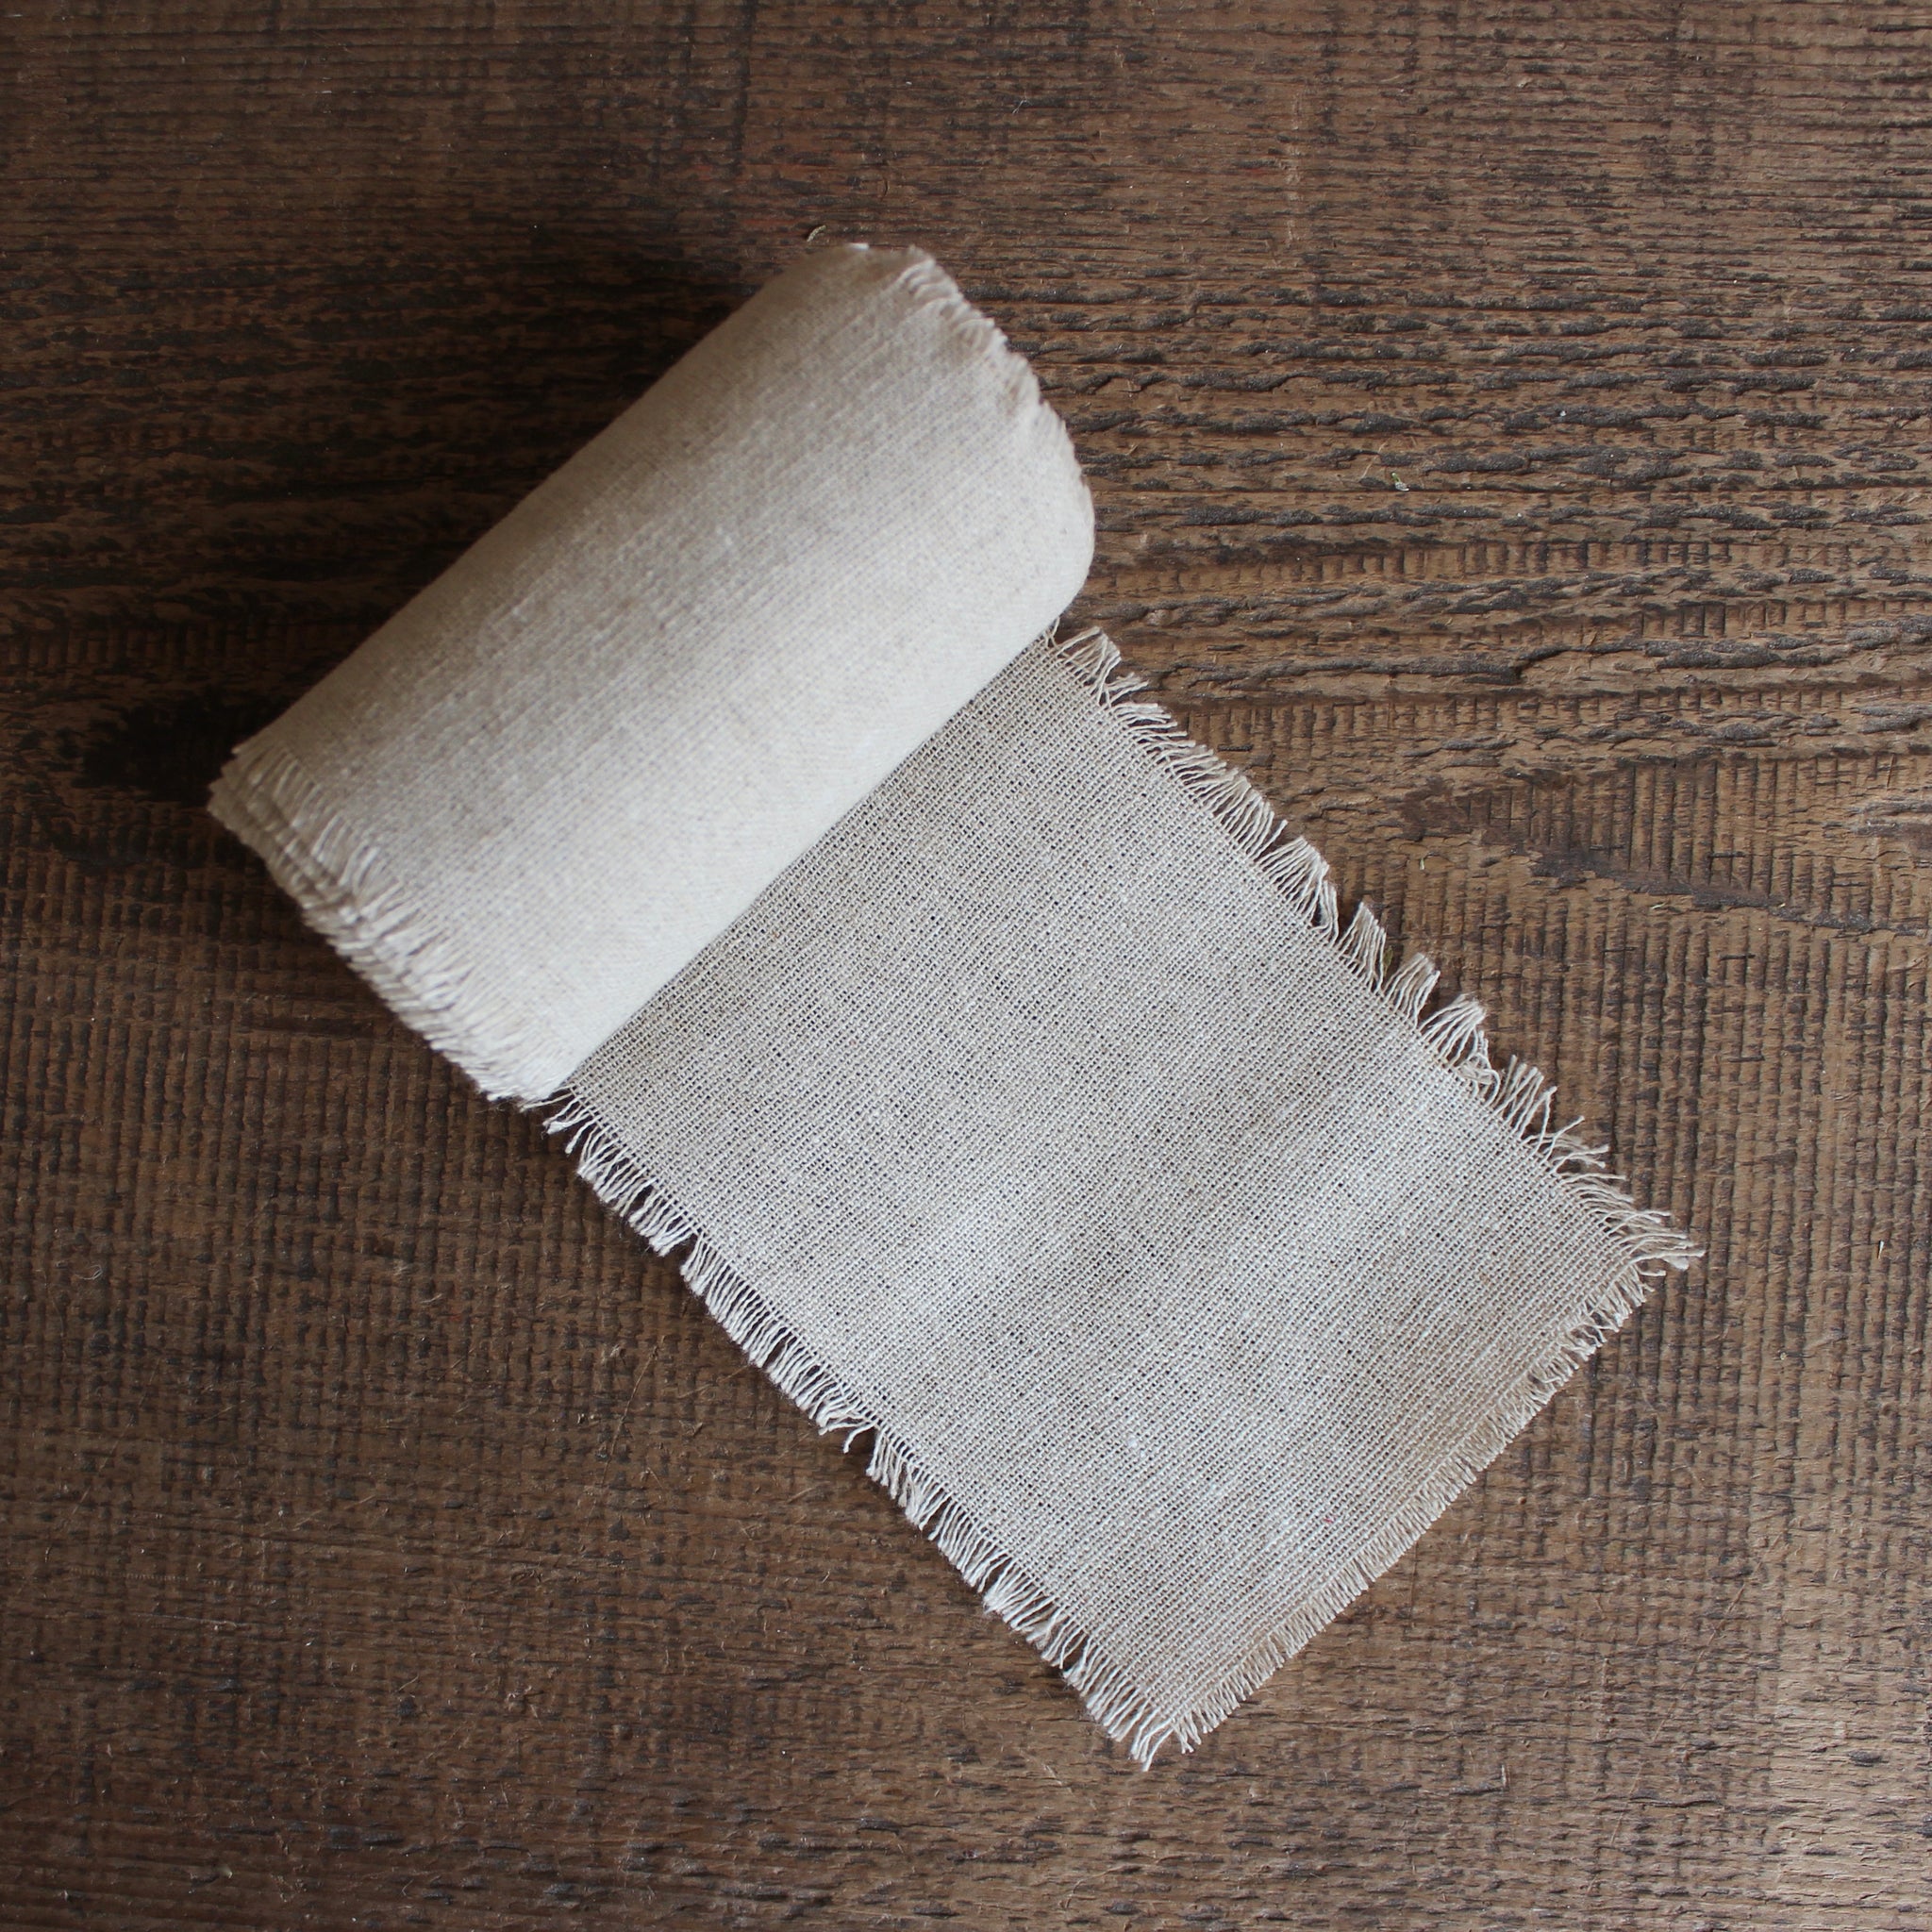 Linen Ribbon with fringed edges, handmade, small shop, — Made on 23rd